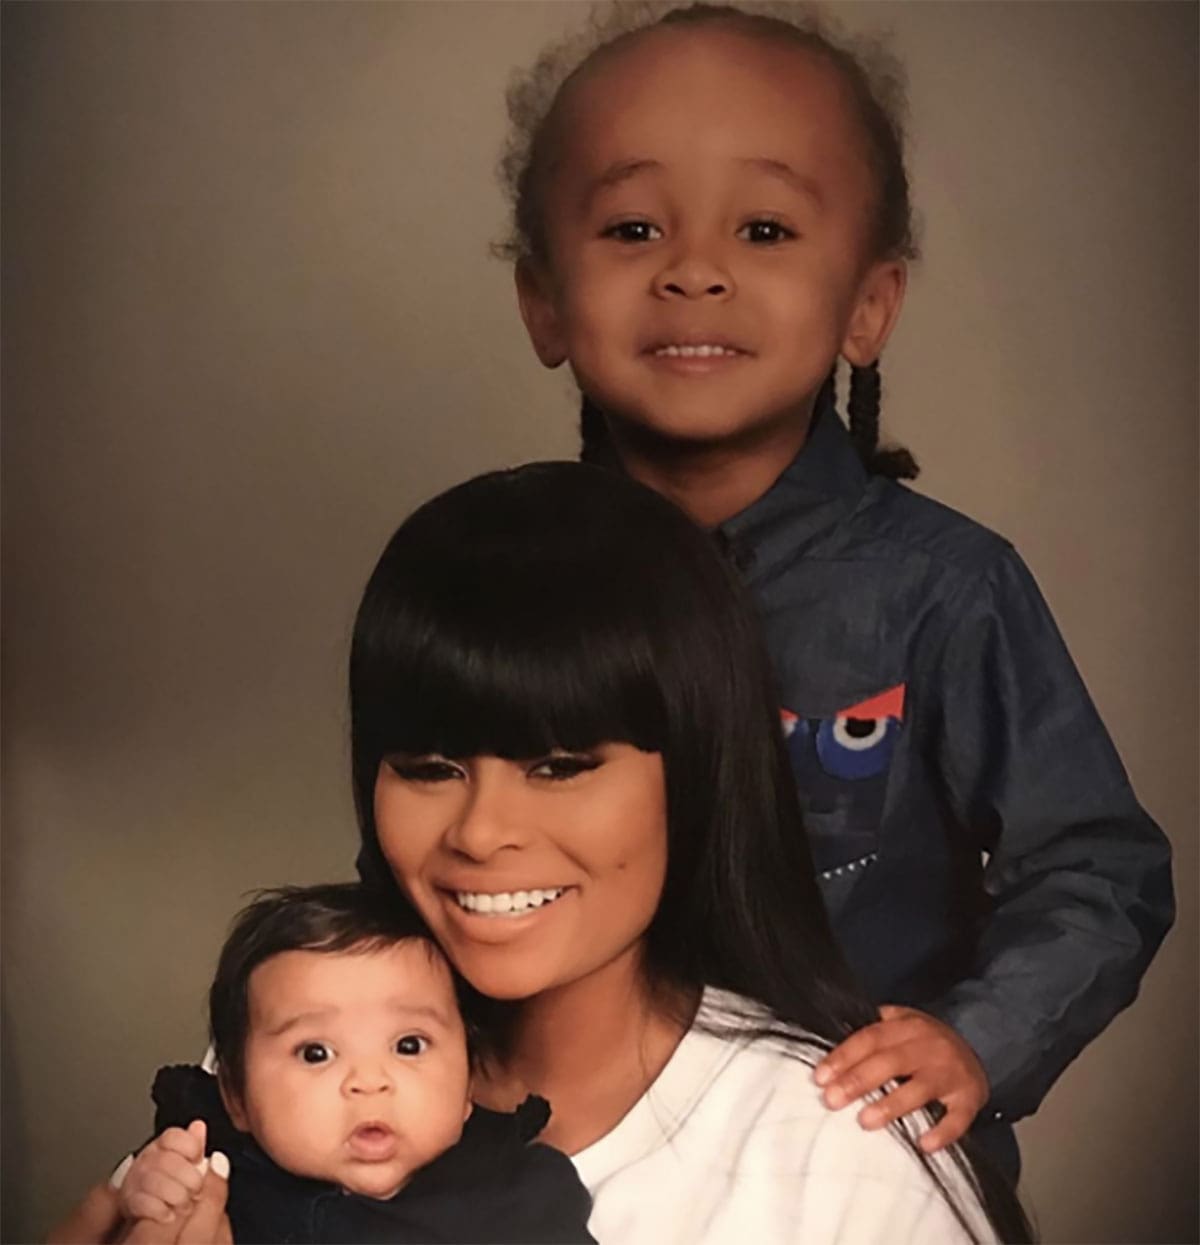 Blac Chyna Makes Fans Cry With The Latest Video Featuring Her Two Kids